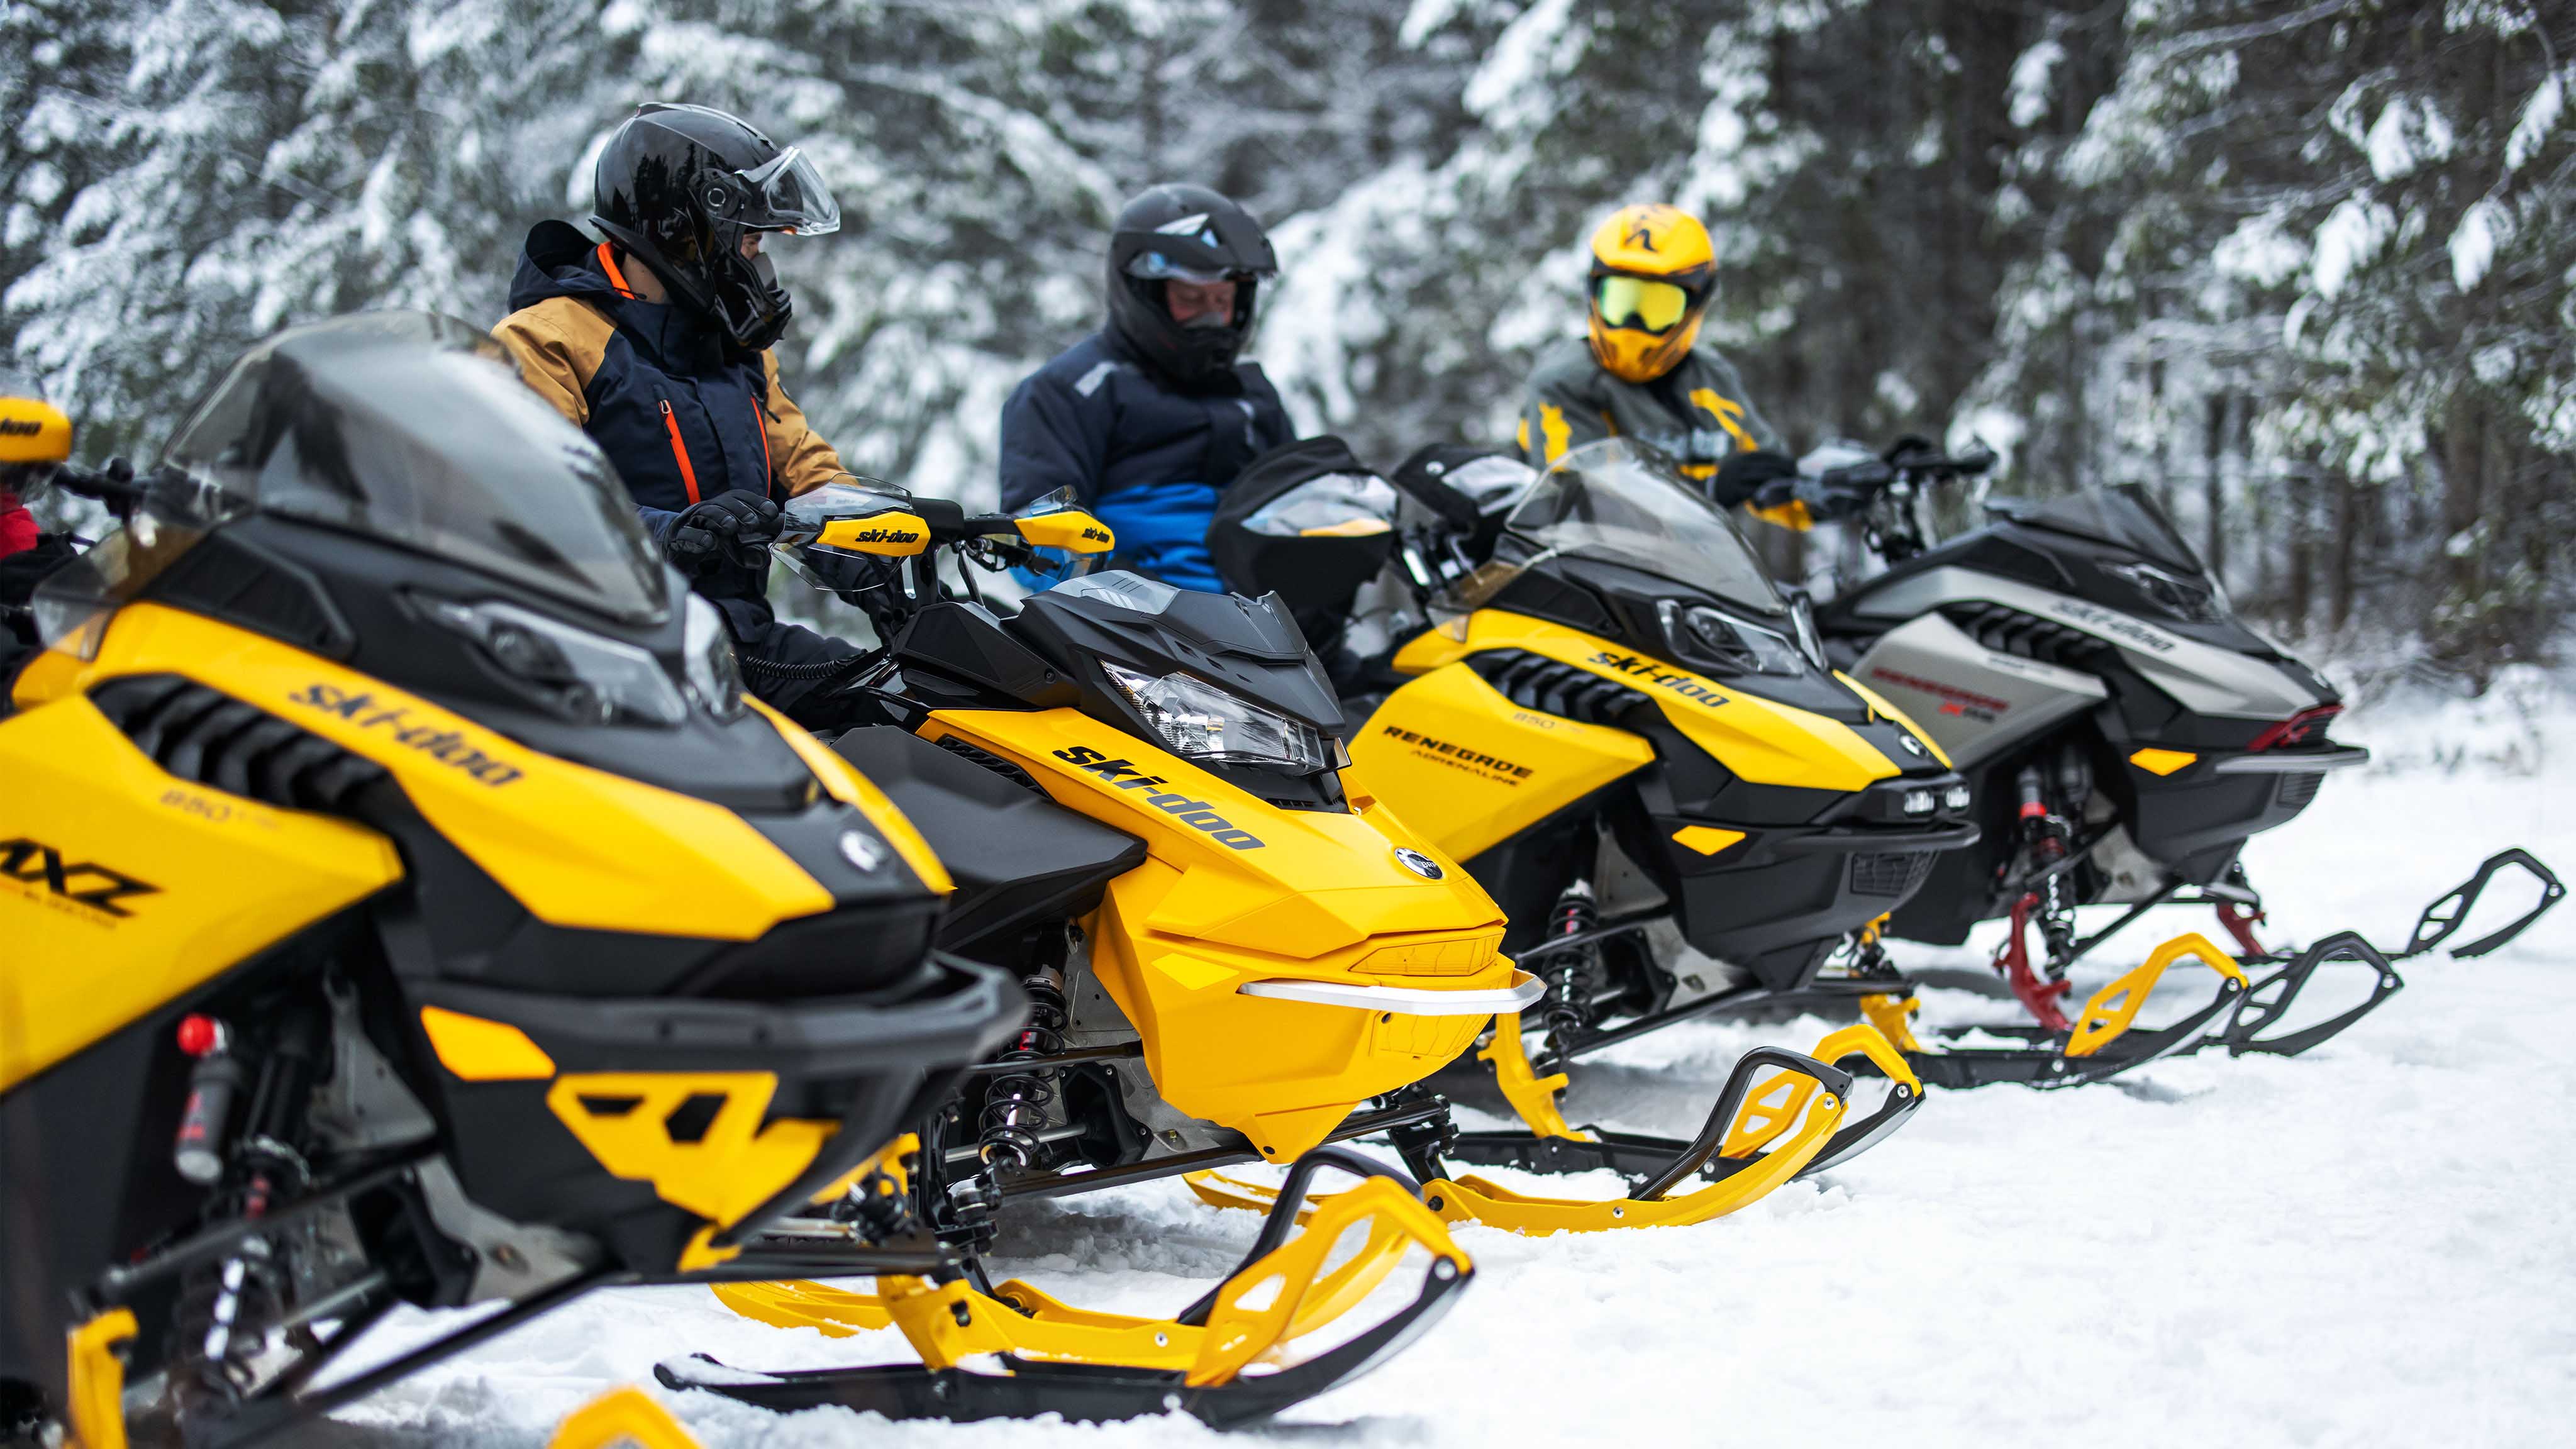 Riders before a snowmobile ride with 2023 Ski-Doo models